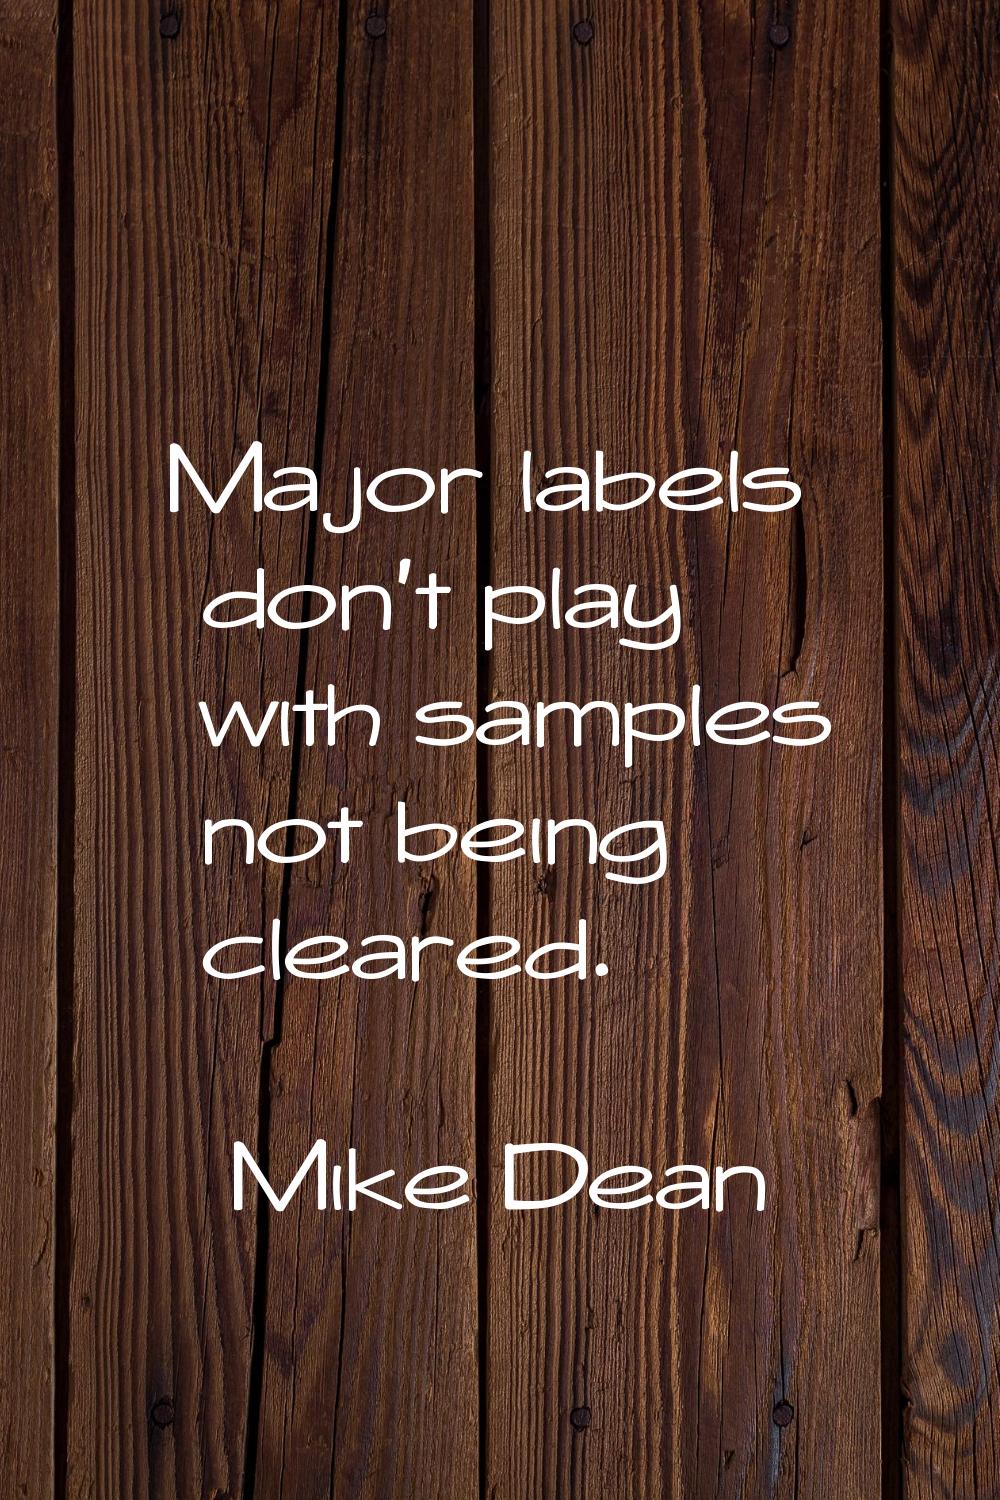 Major labels don't play with samples not being cleared.